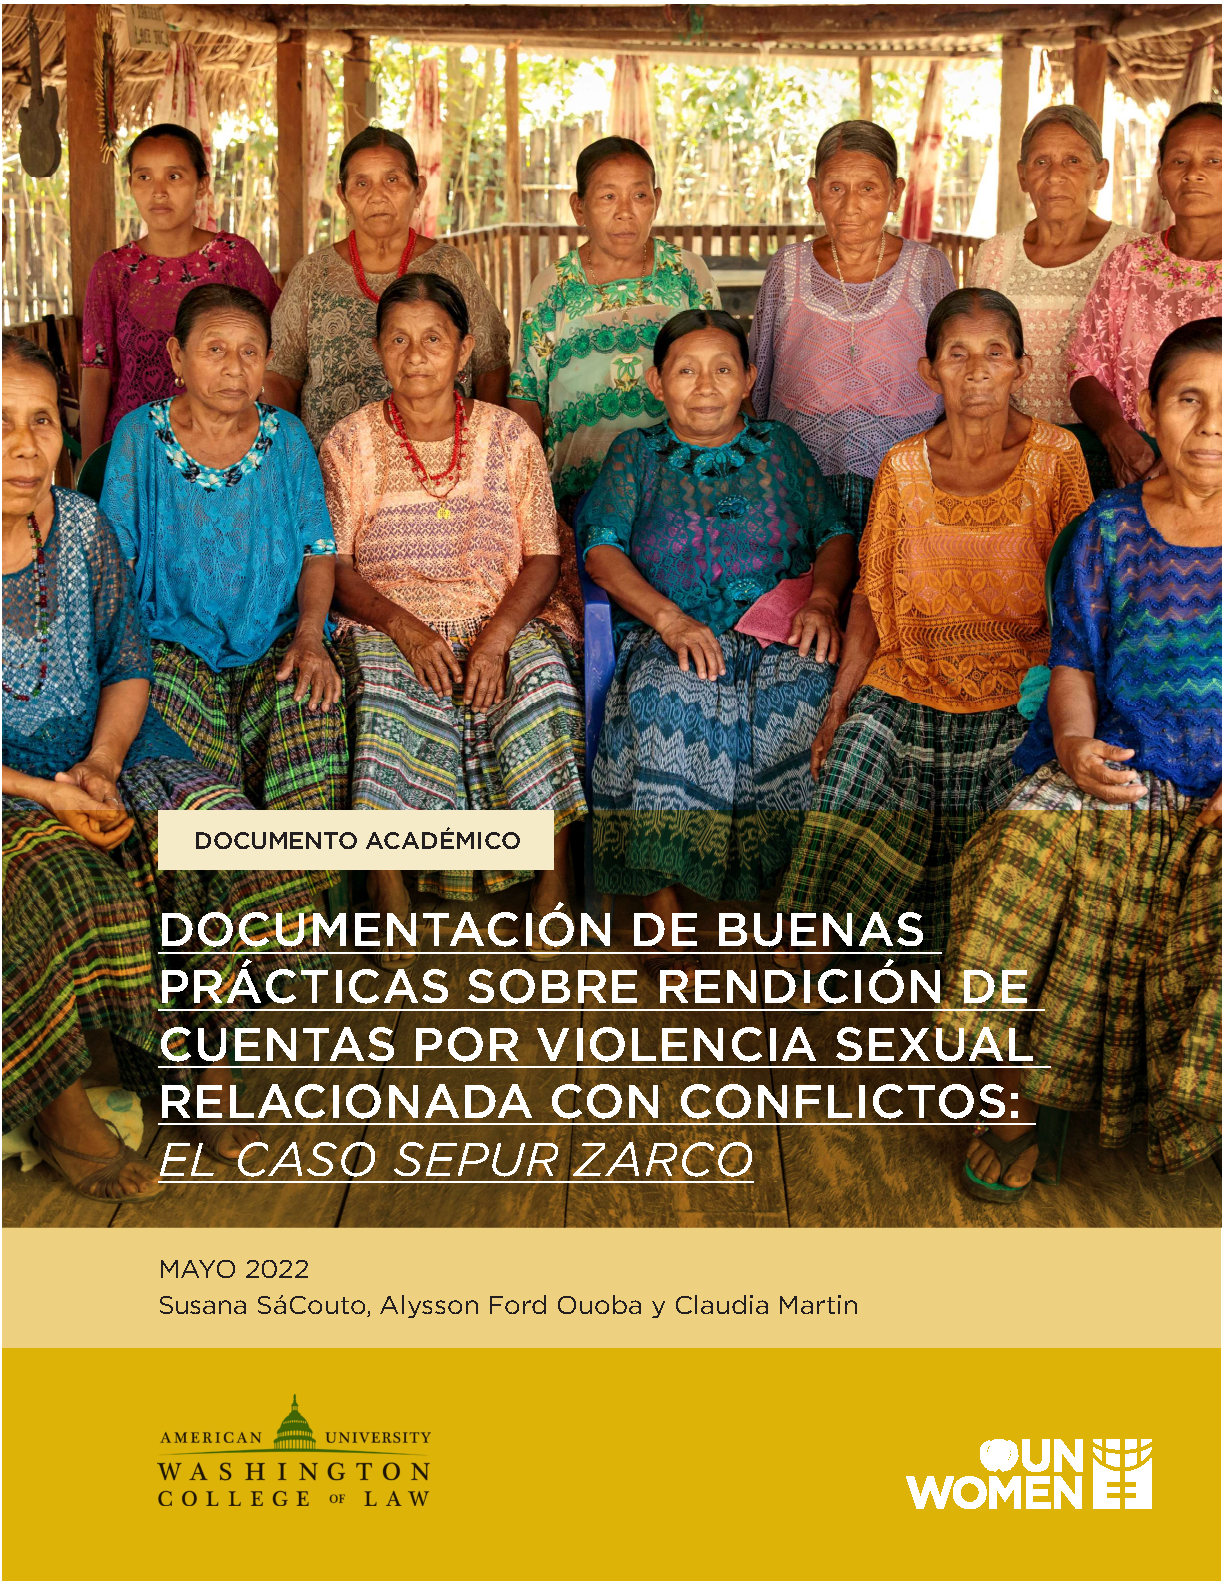 Documenting Good Practice on Accountability For Conflict-Related Sexual Violence: the Sepur Zarco Case (Spanish)